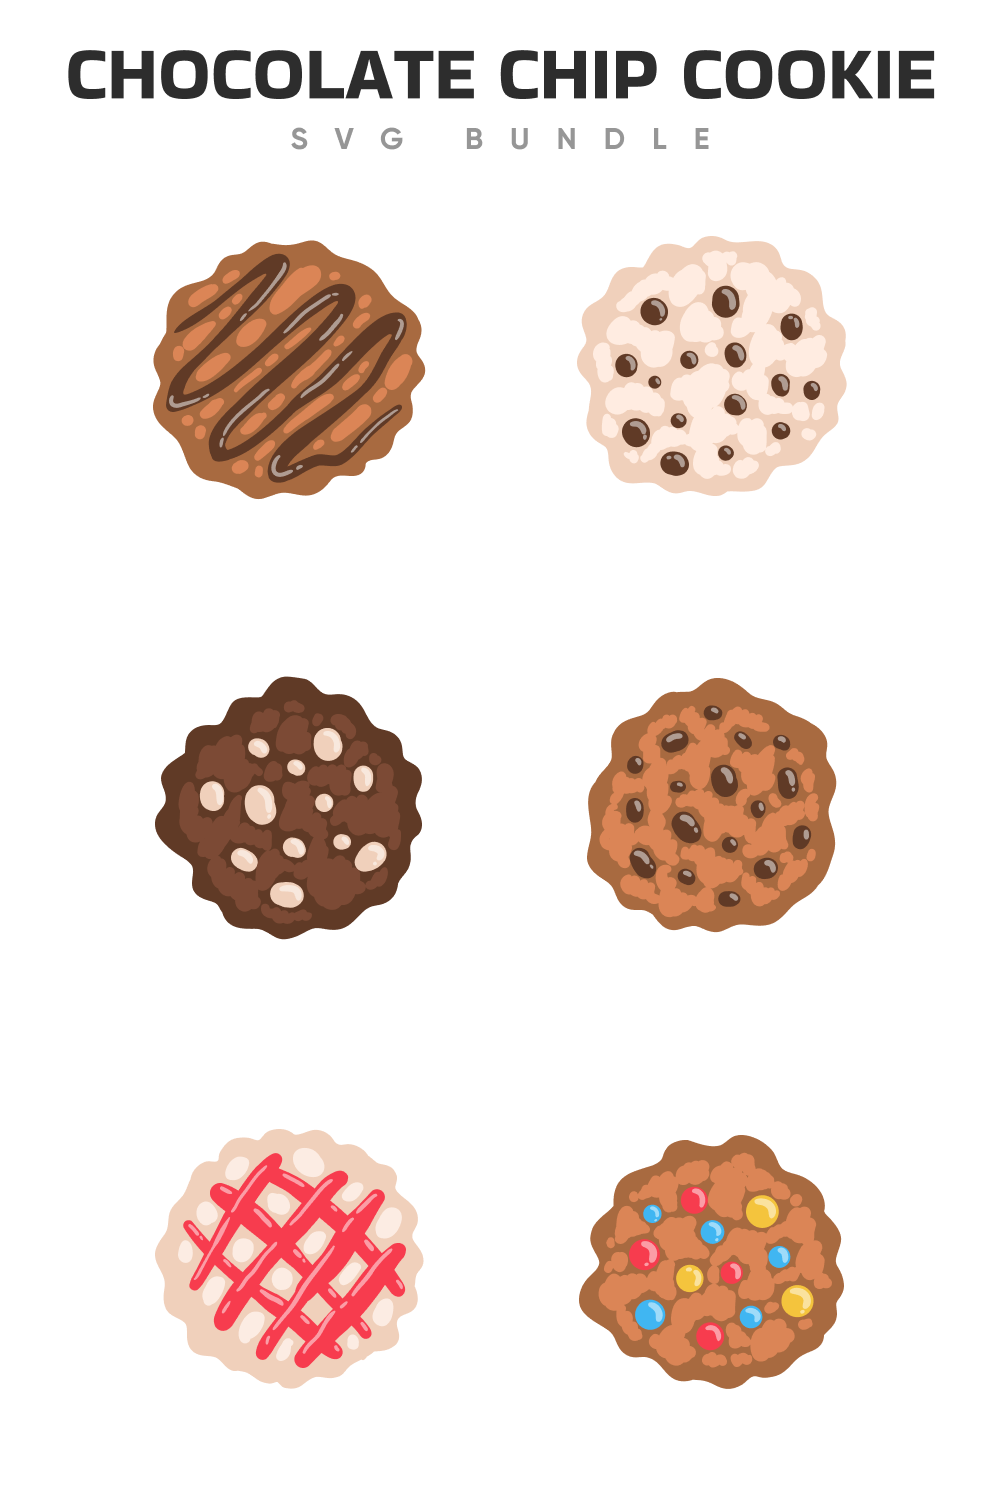 Diverse of chocolate chip cookies for your holiday.